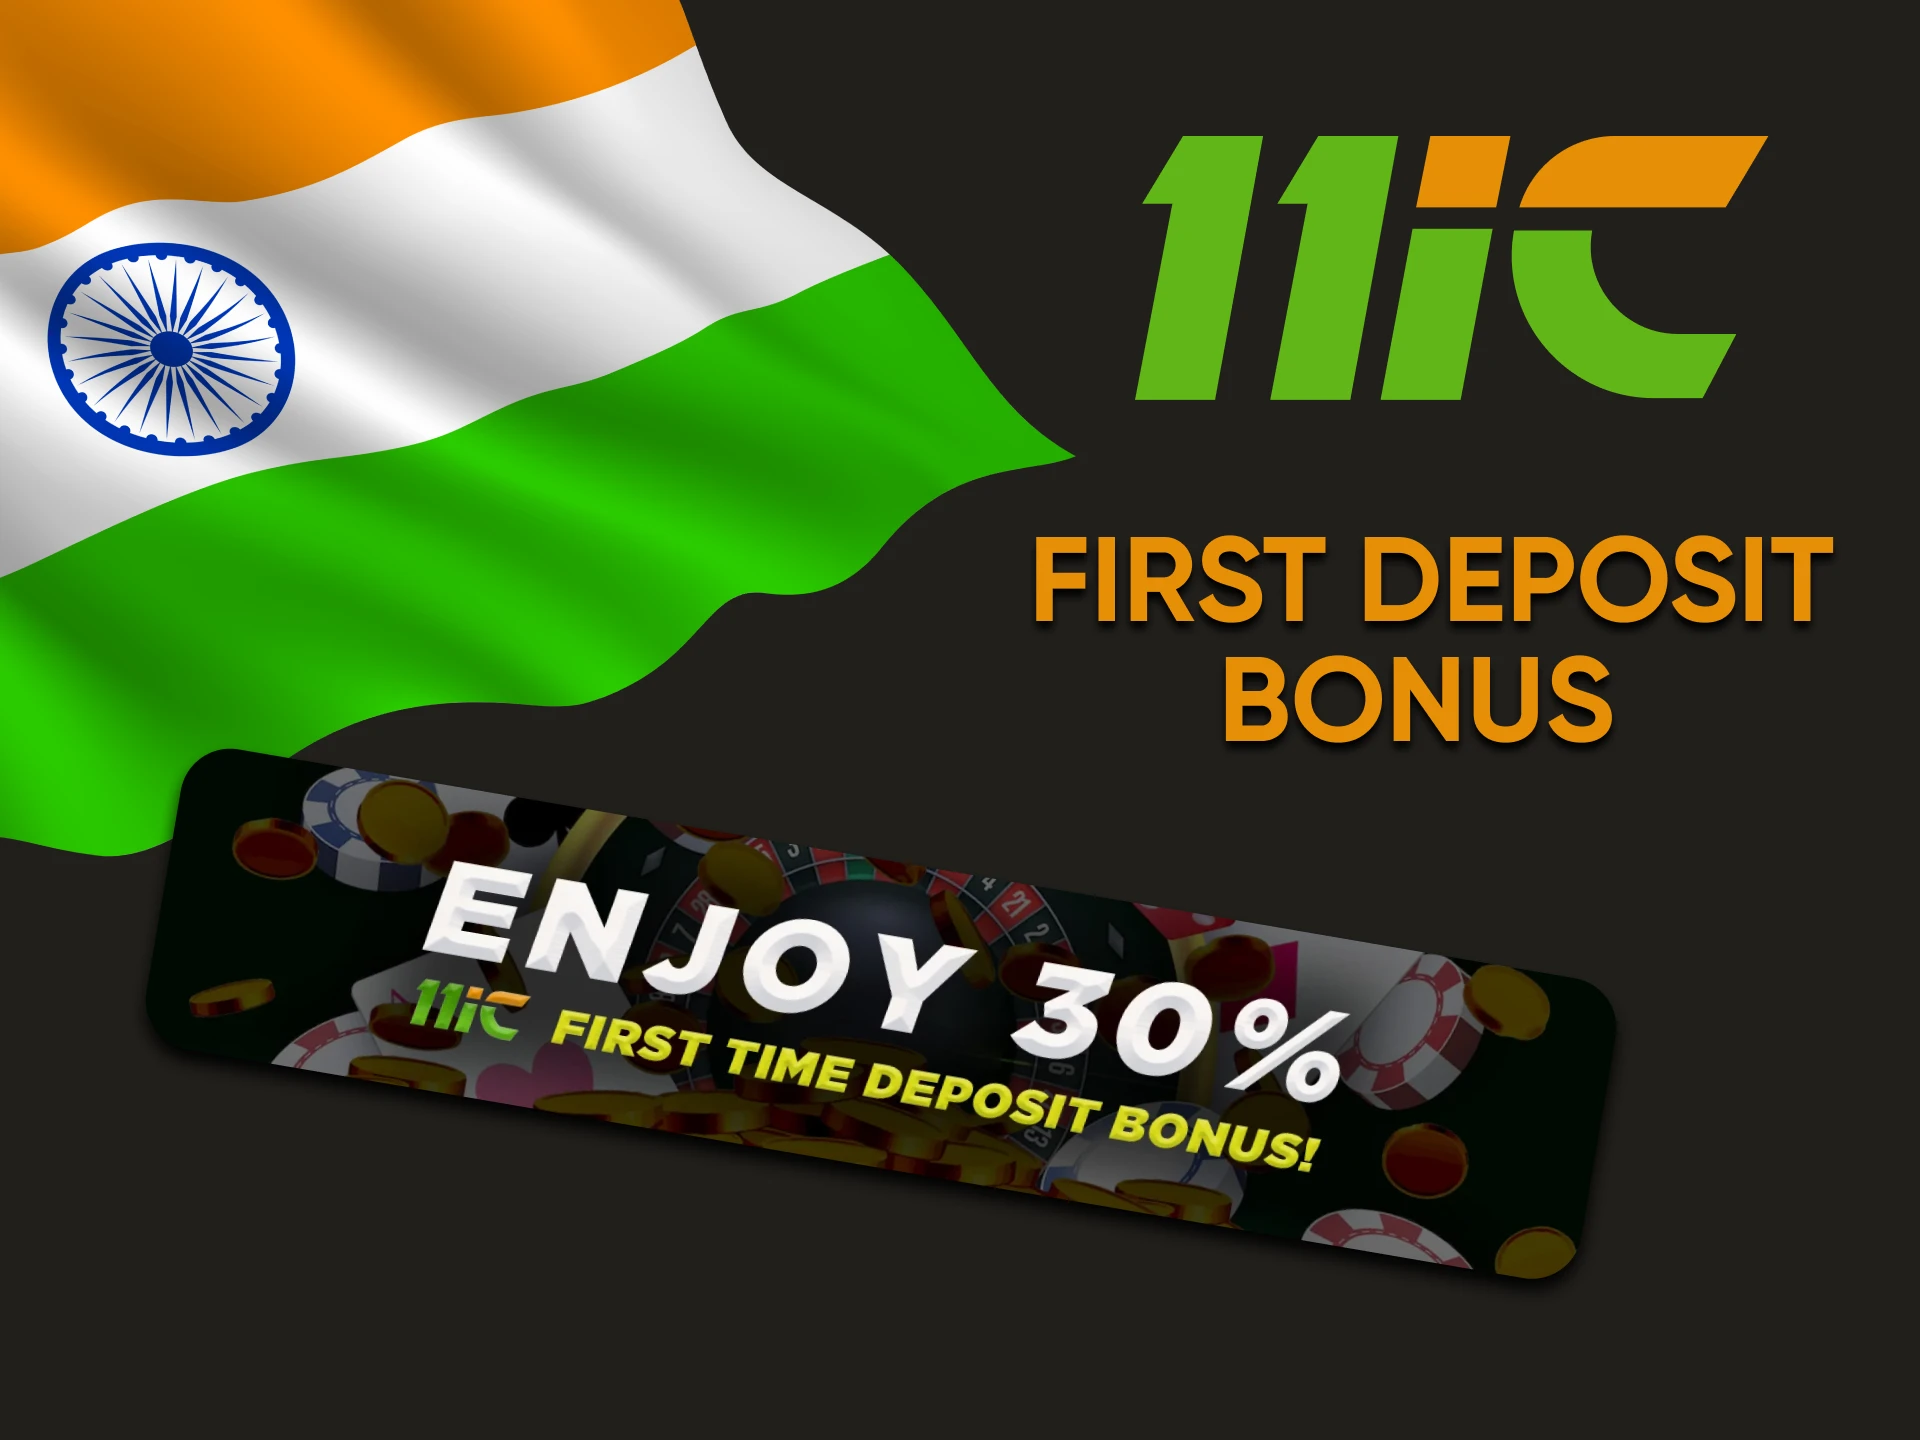 Top up your deposit and get a cricket betting bonus from 11ic.